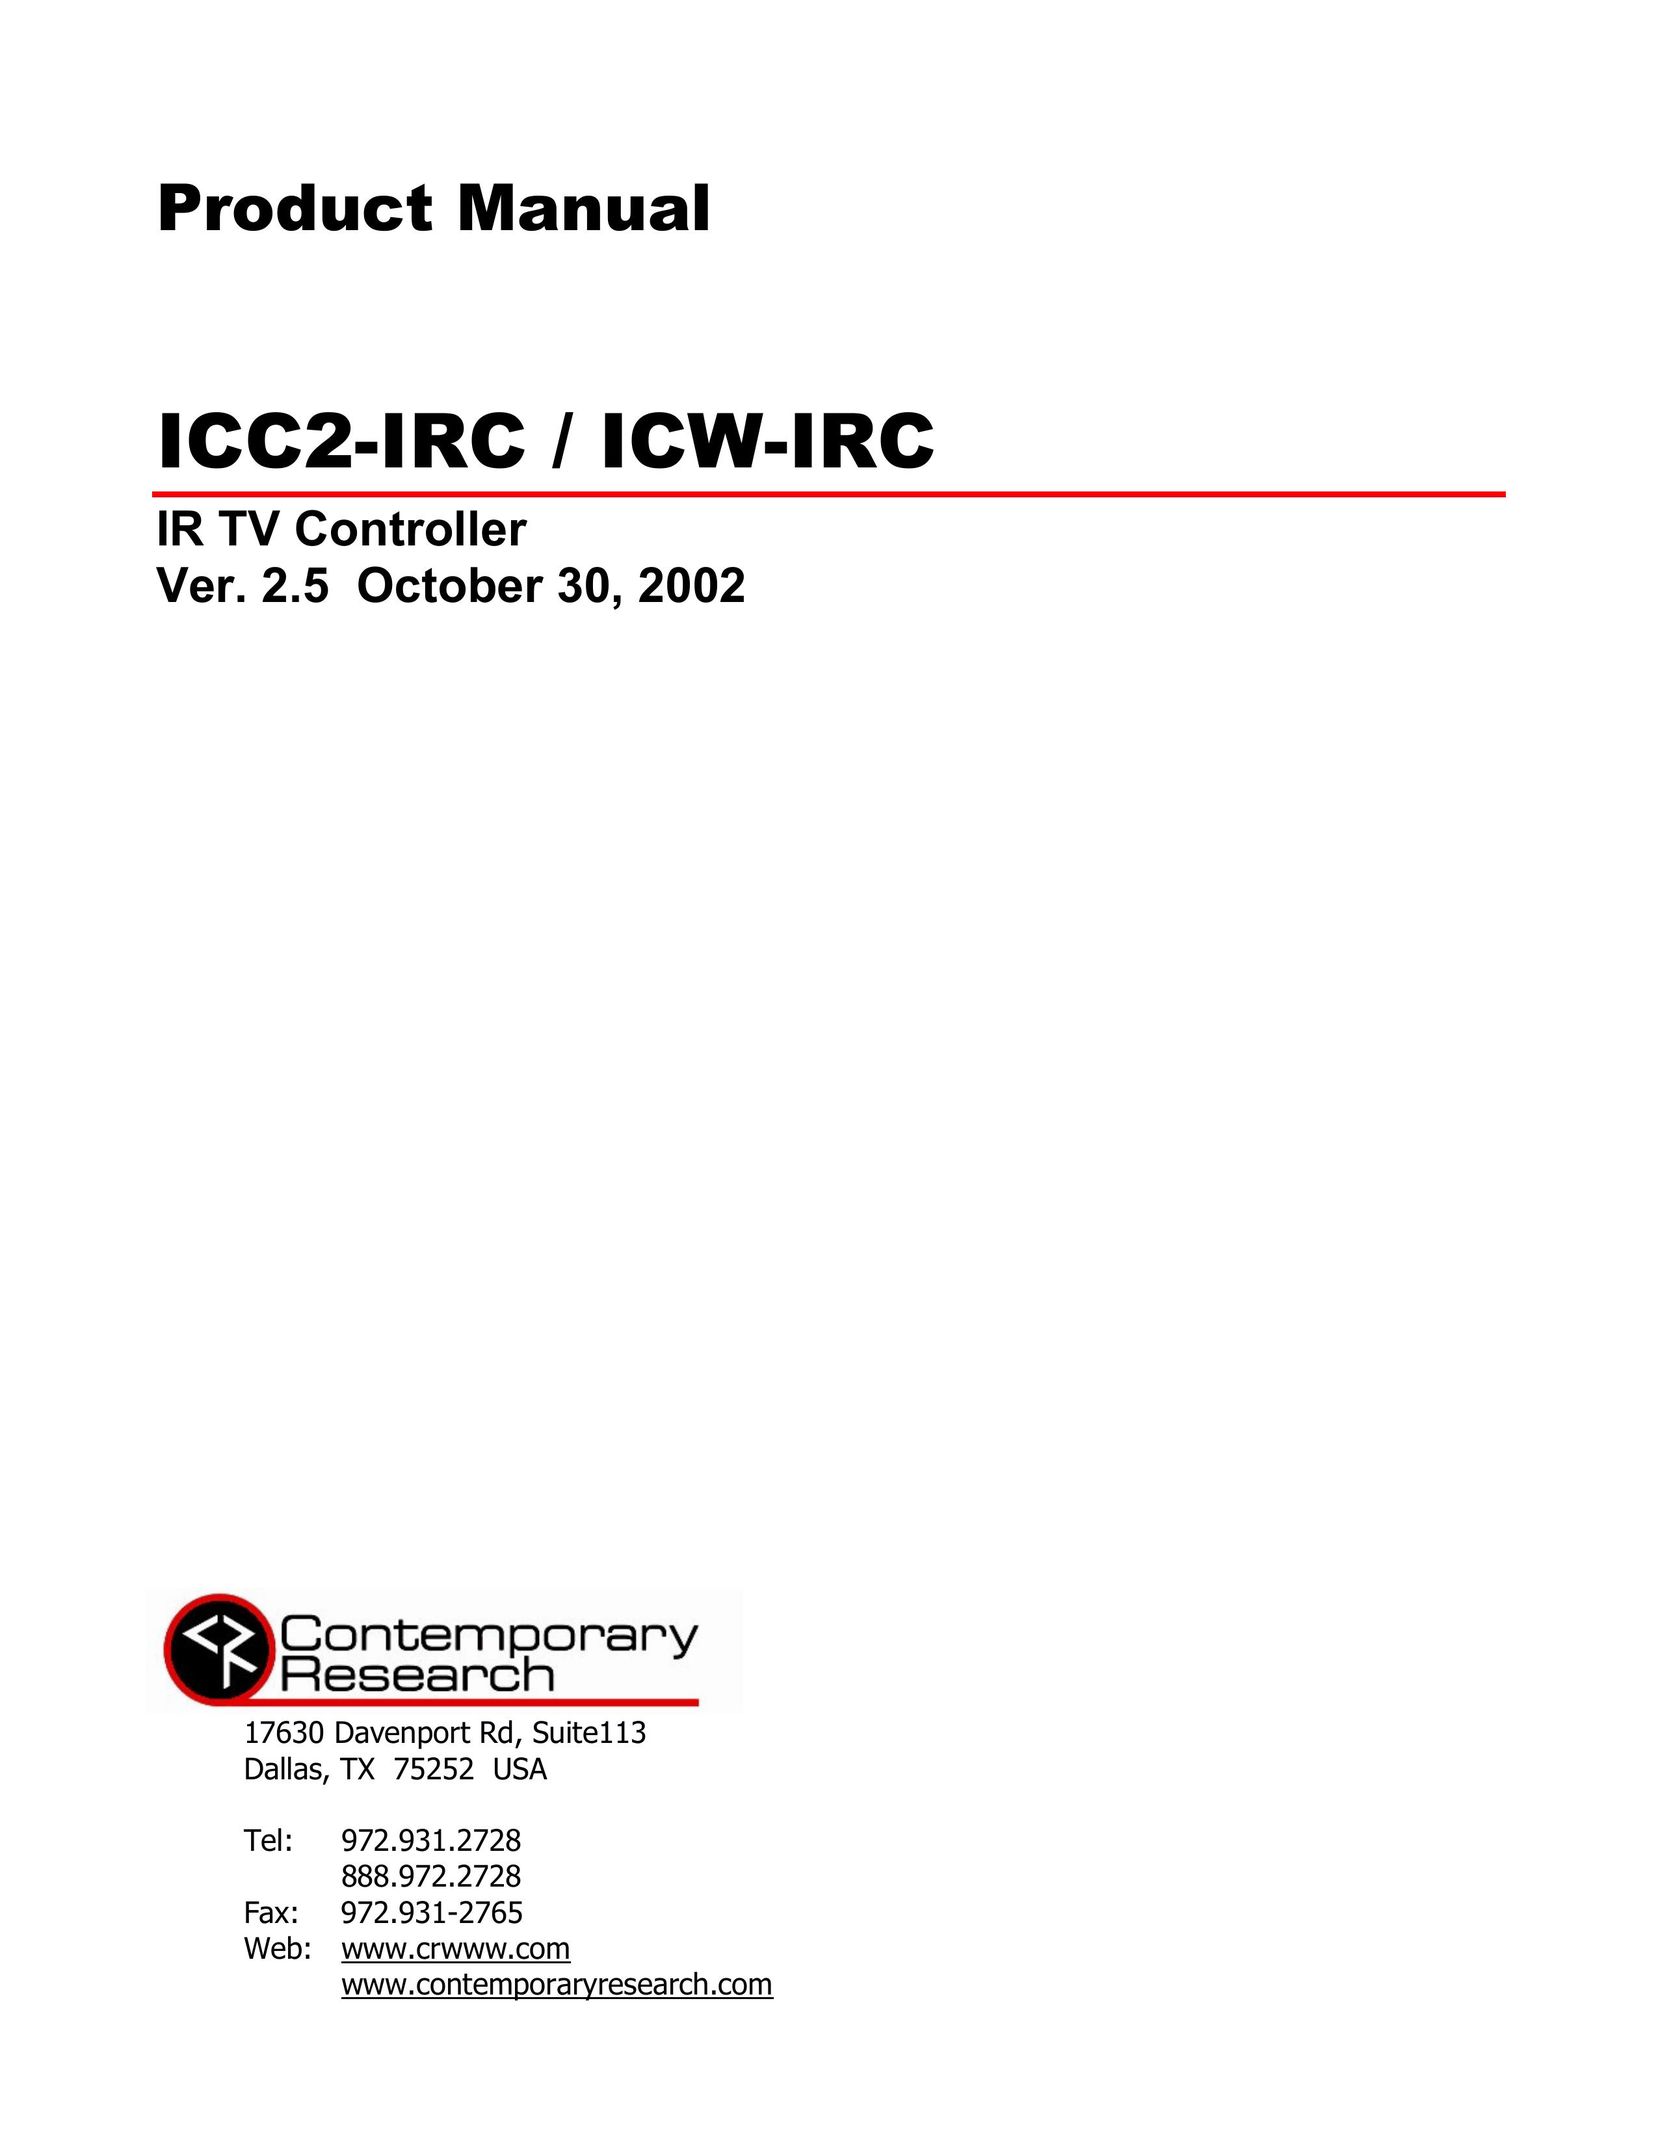 Contemporary Research ICC2-IRC Universal Remote User Manual